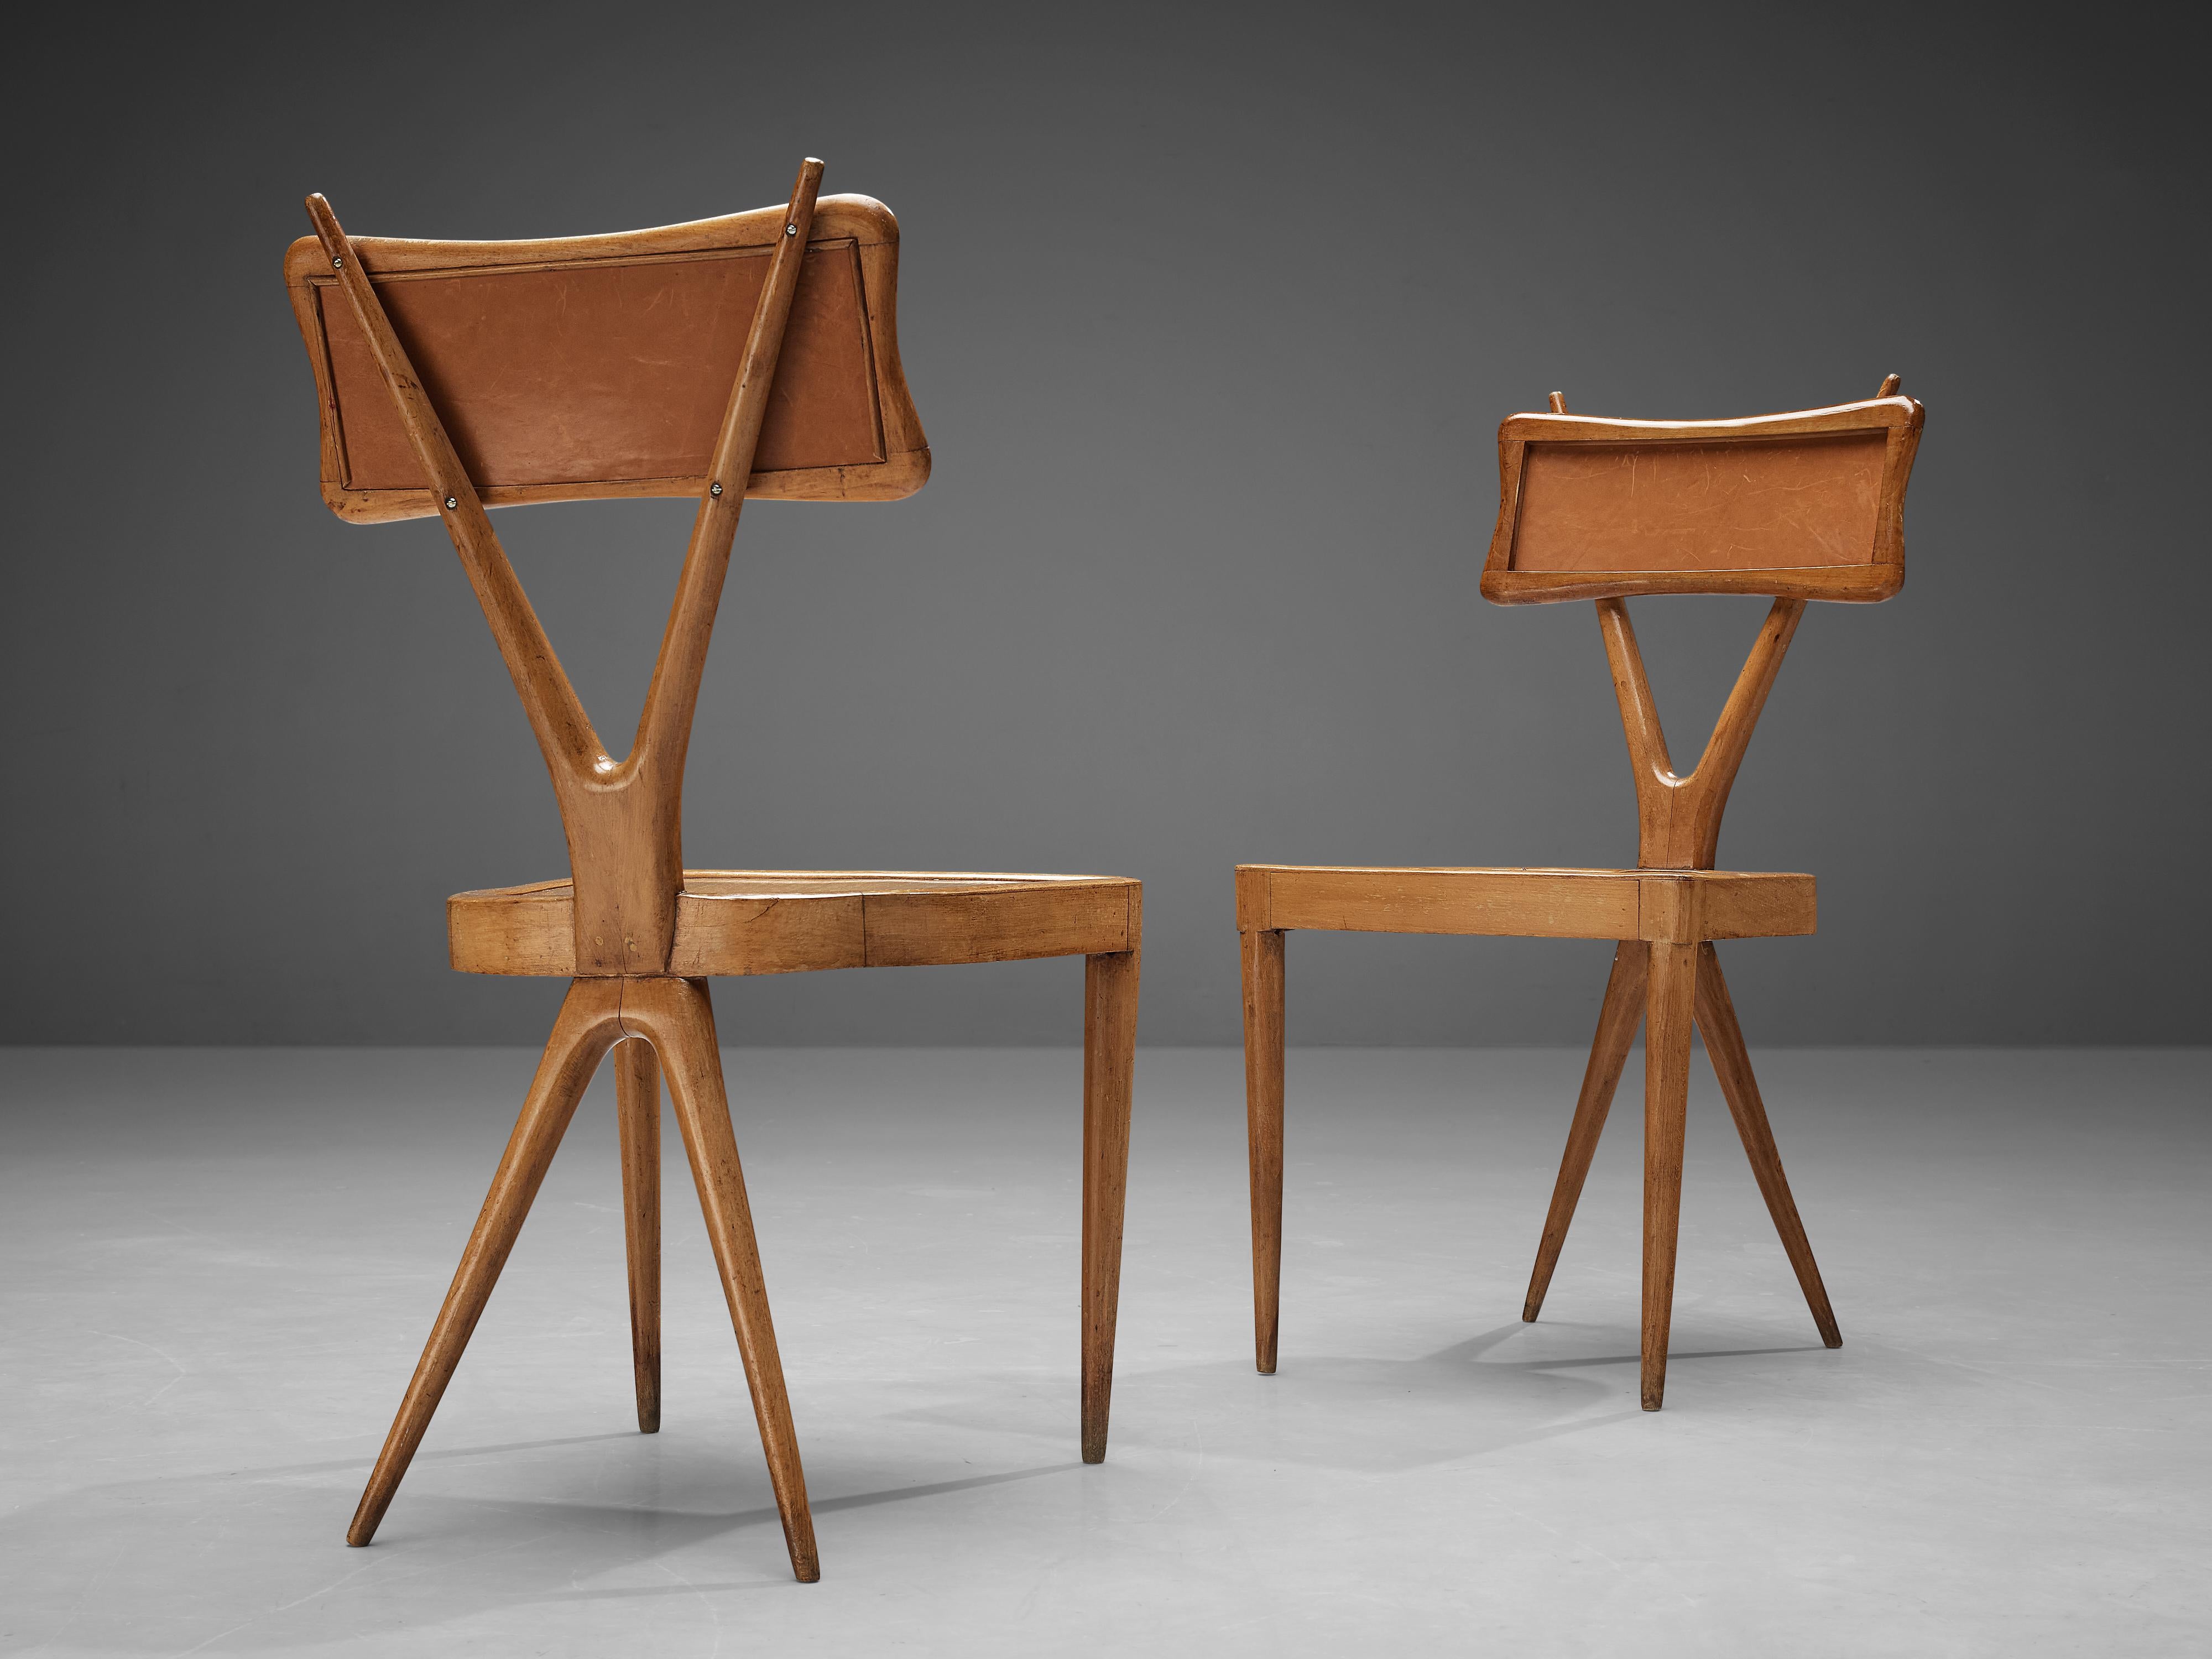 Gianni Vigorelli, pair of dining chairs, beech, plywood, leatherette, Italy, 1950s.

These chairs are beautifully constructed featuring a X-shaped frame, a striking detail that convinces visually. The backrest is carved in a subtle manner and